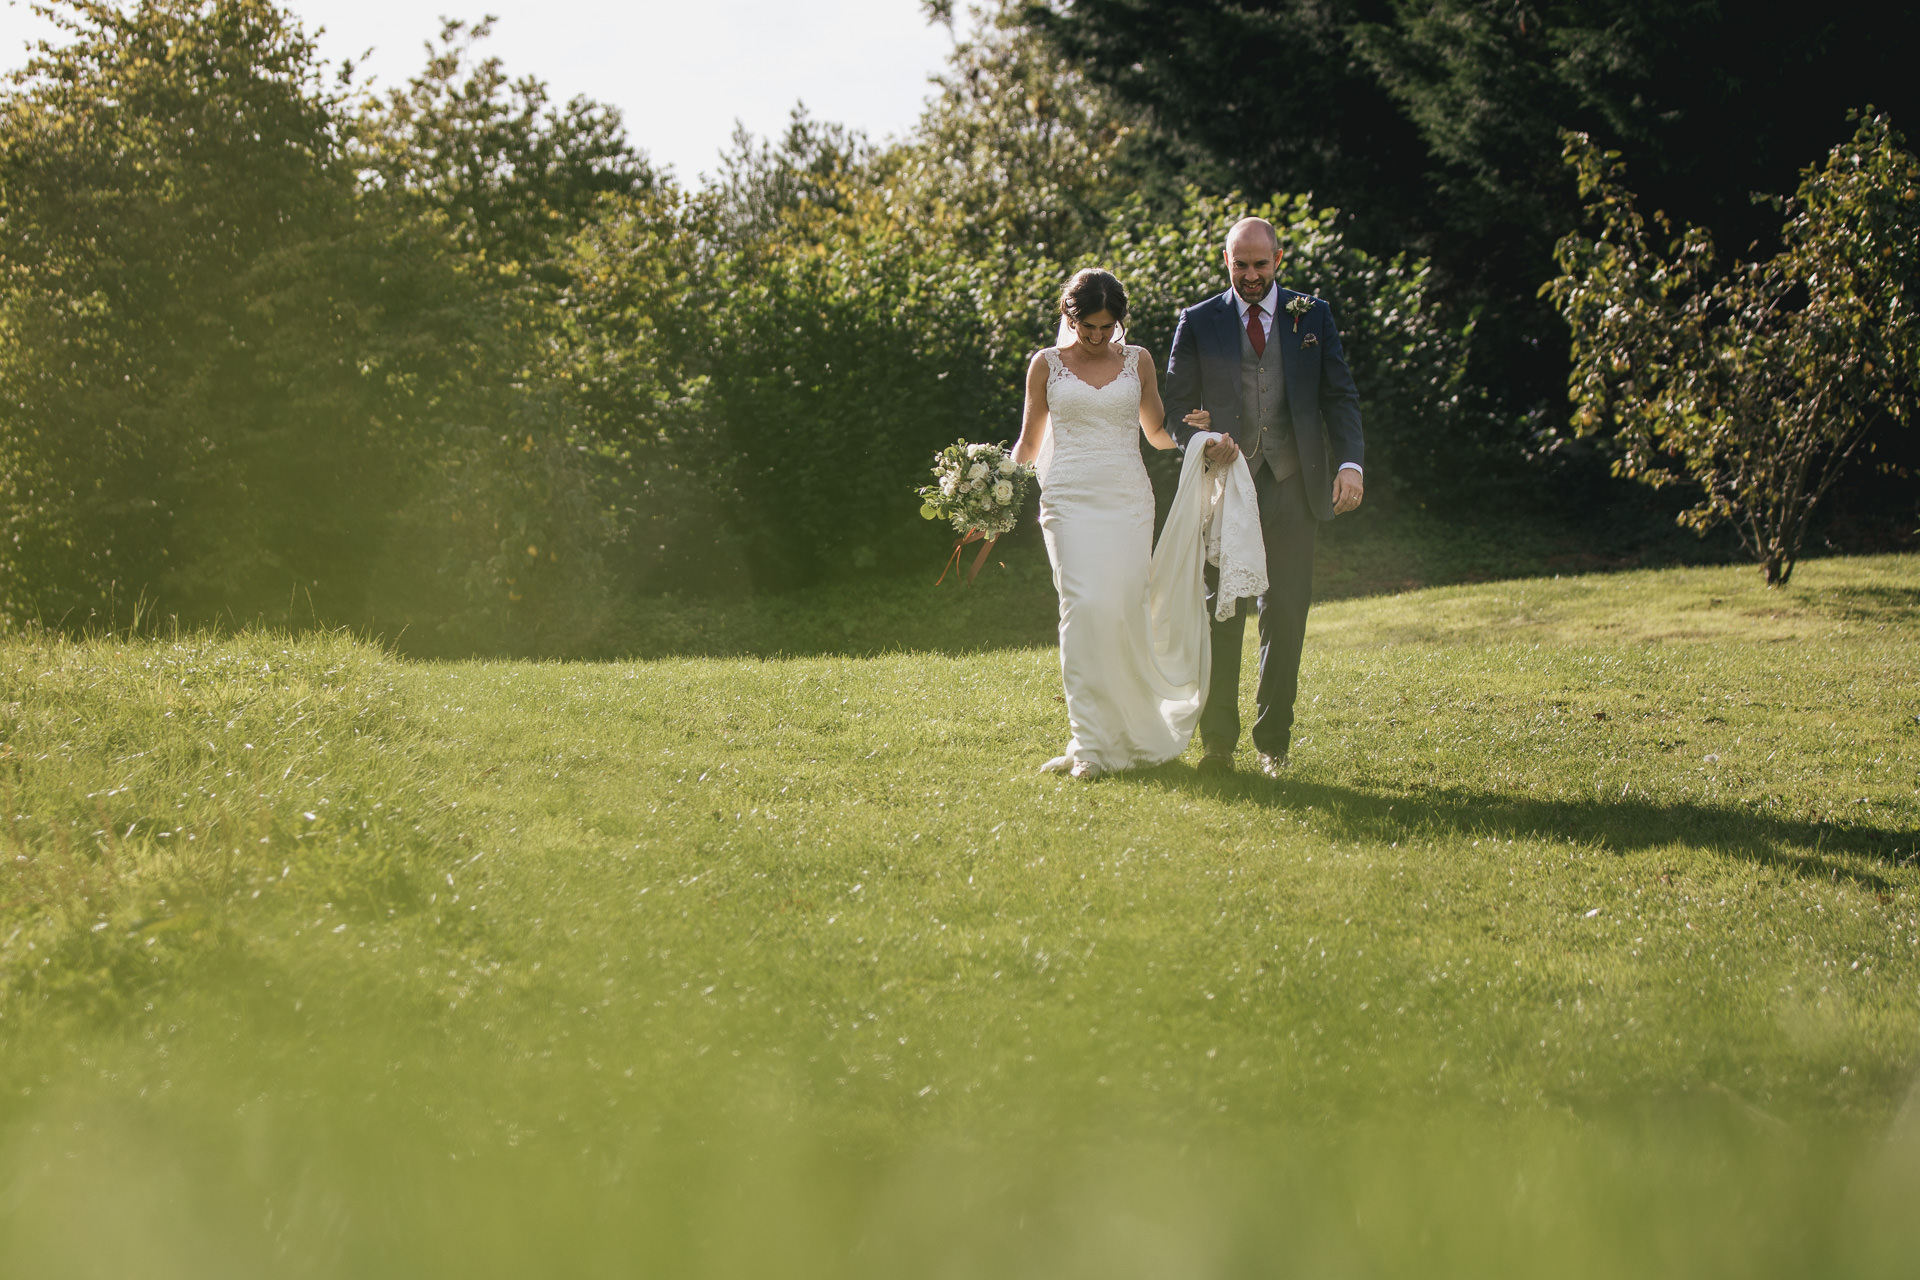 Bride and groom walking across the grass together